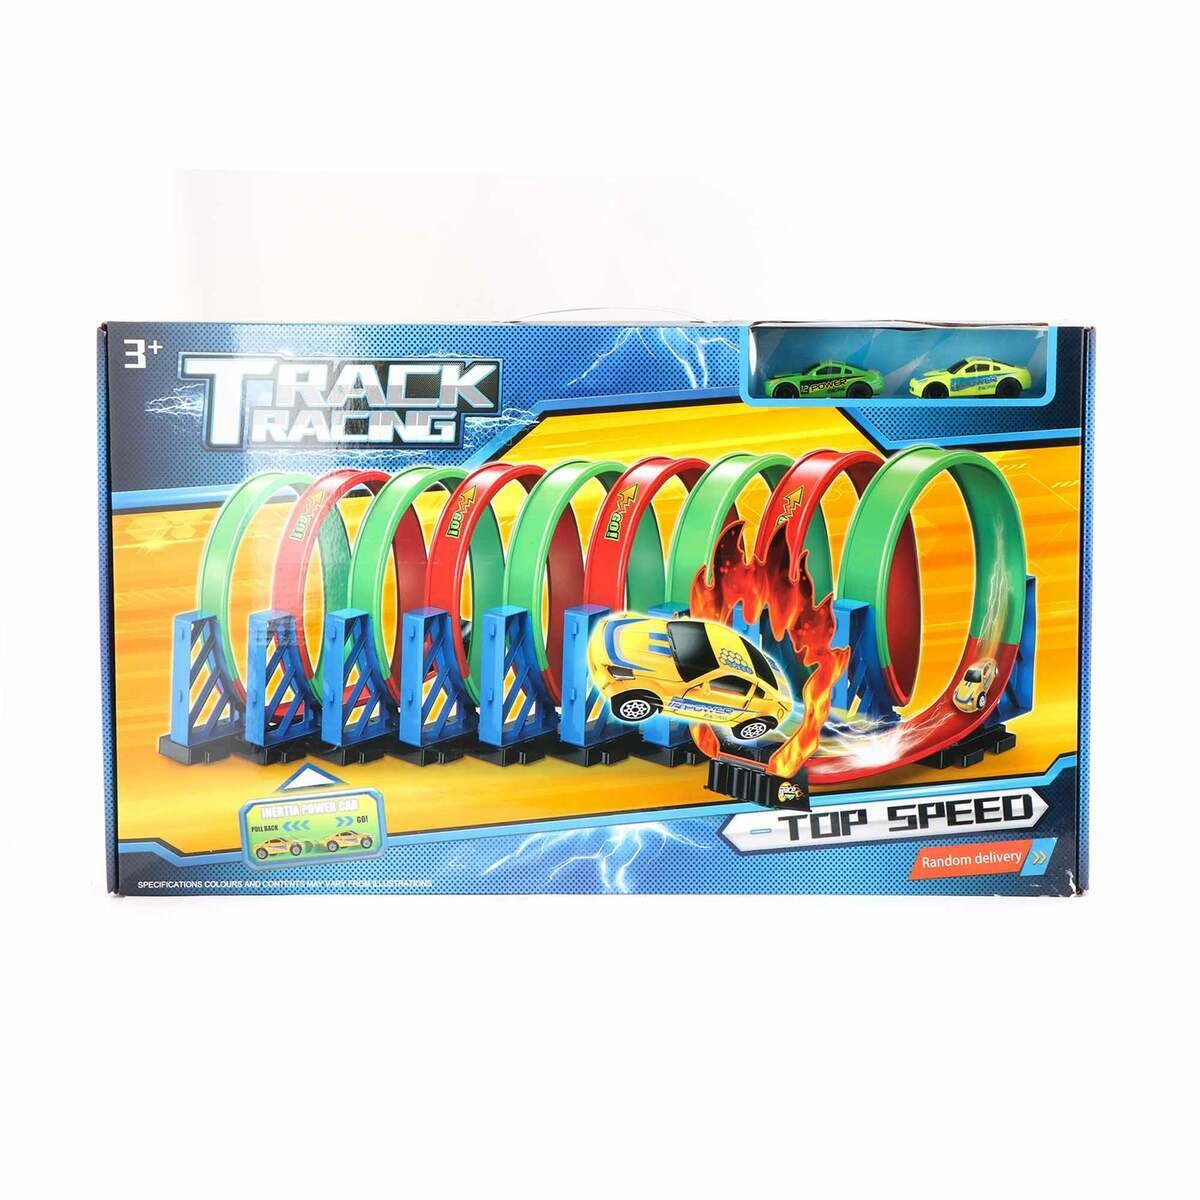 Skid Fusion Track Set with Pull Back Car 8047